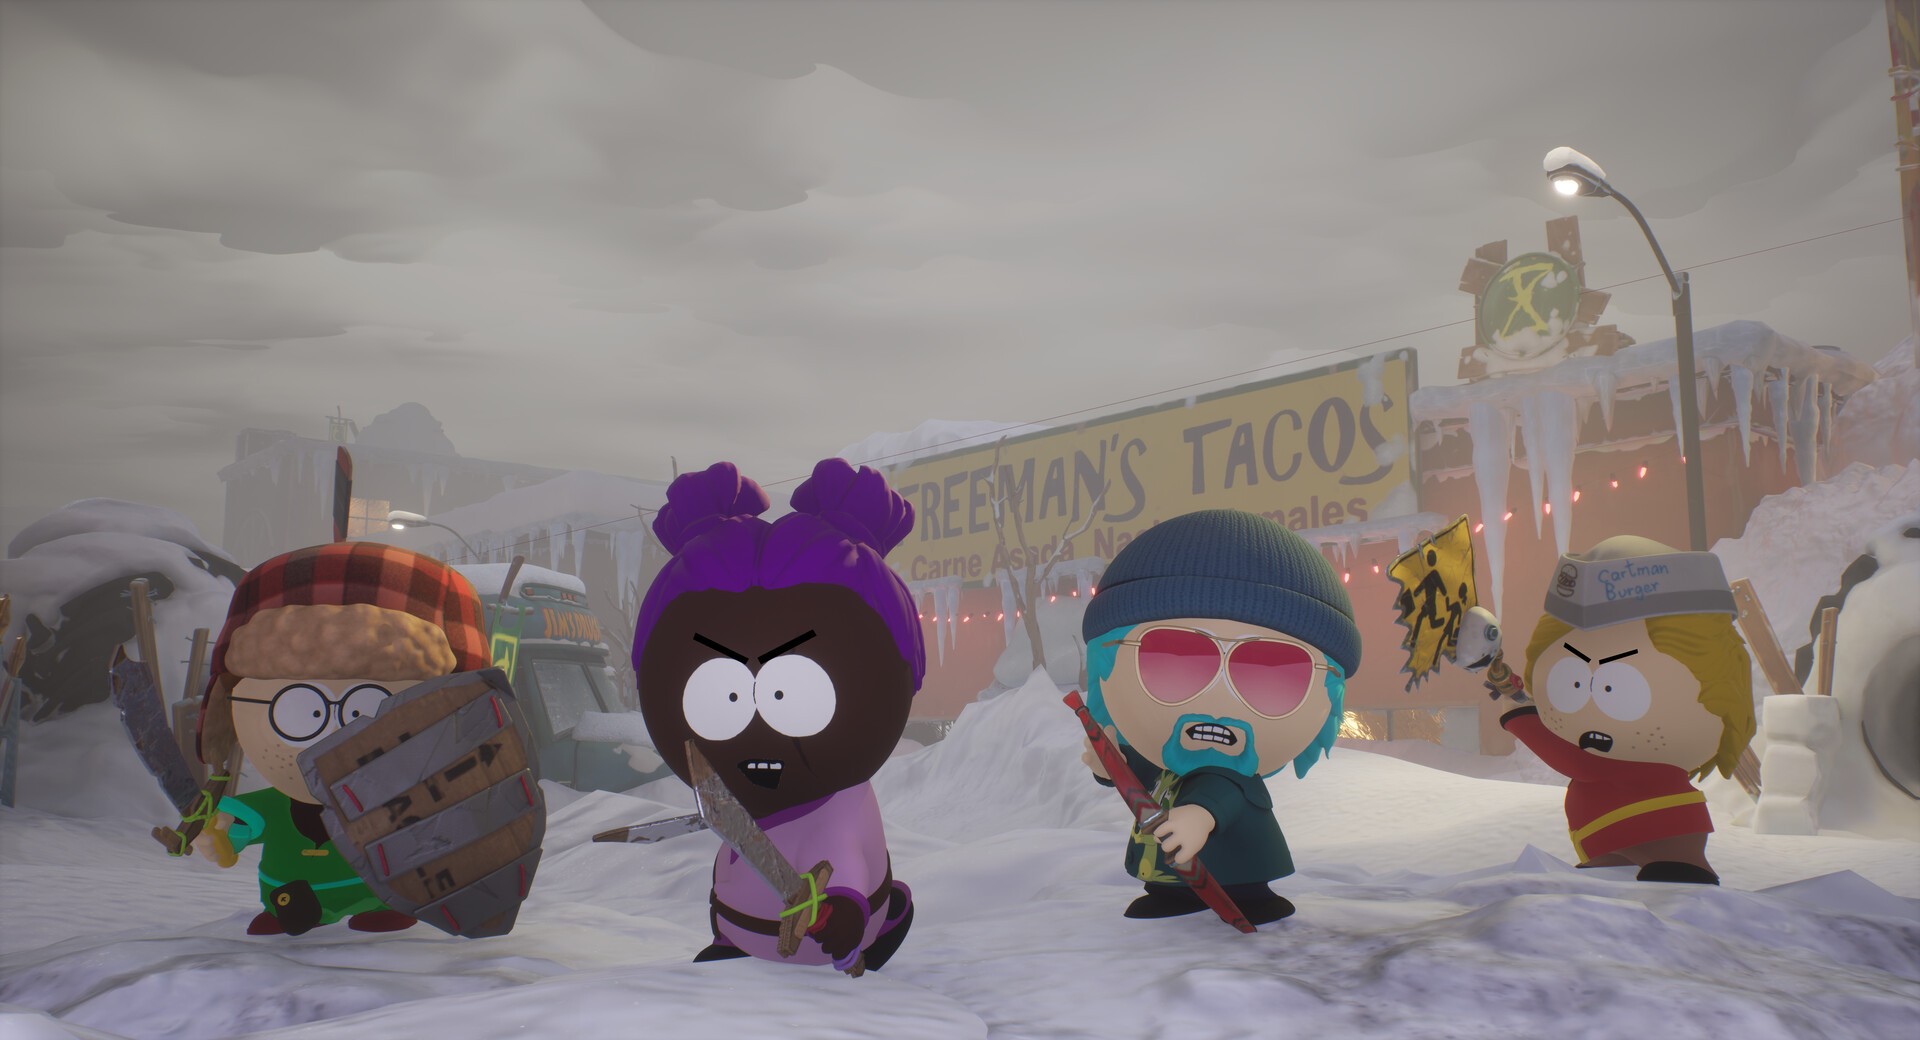 SOUTH PARK: SNOW DAY! PlayStation 5 - Best Buy